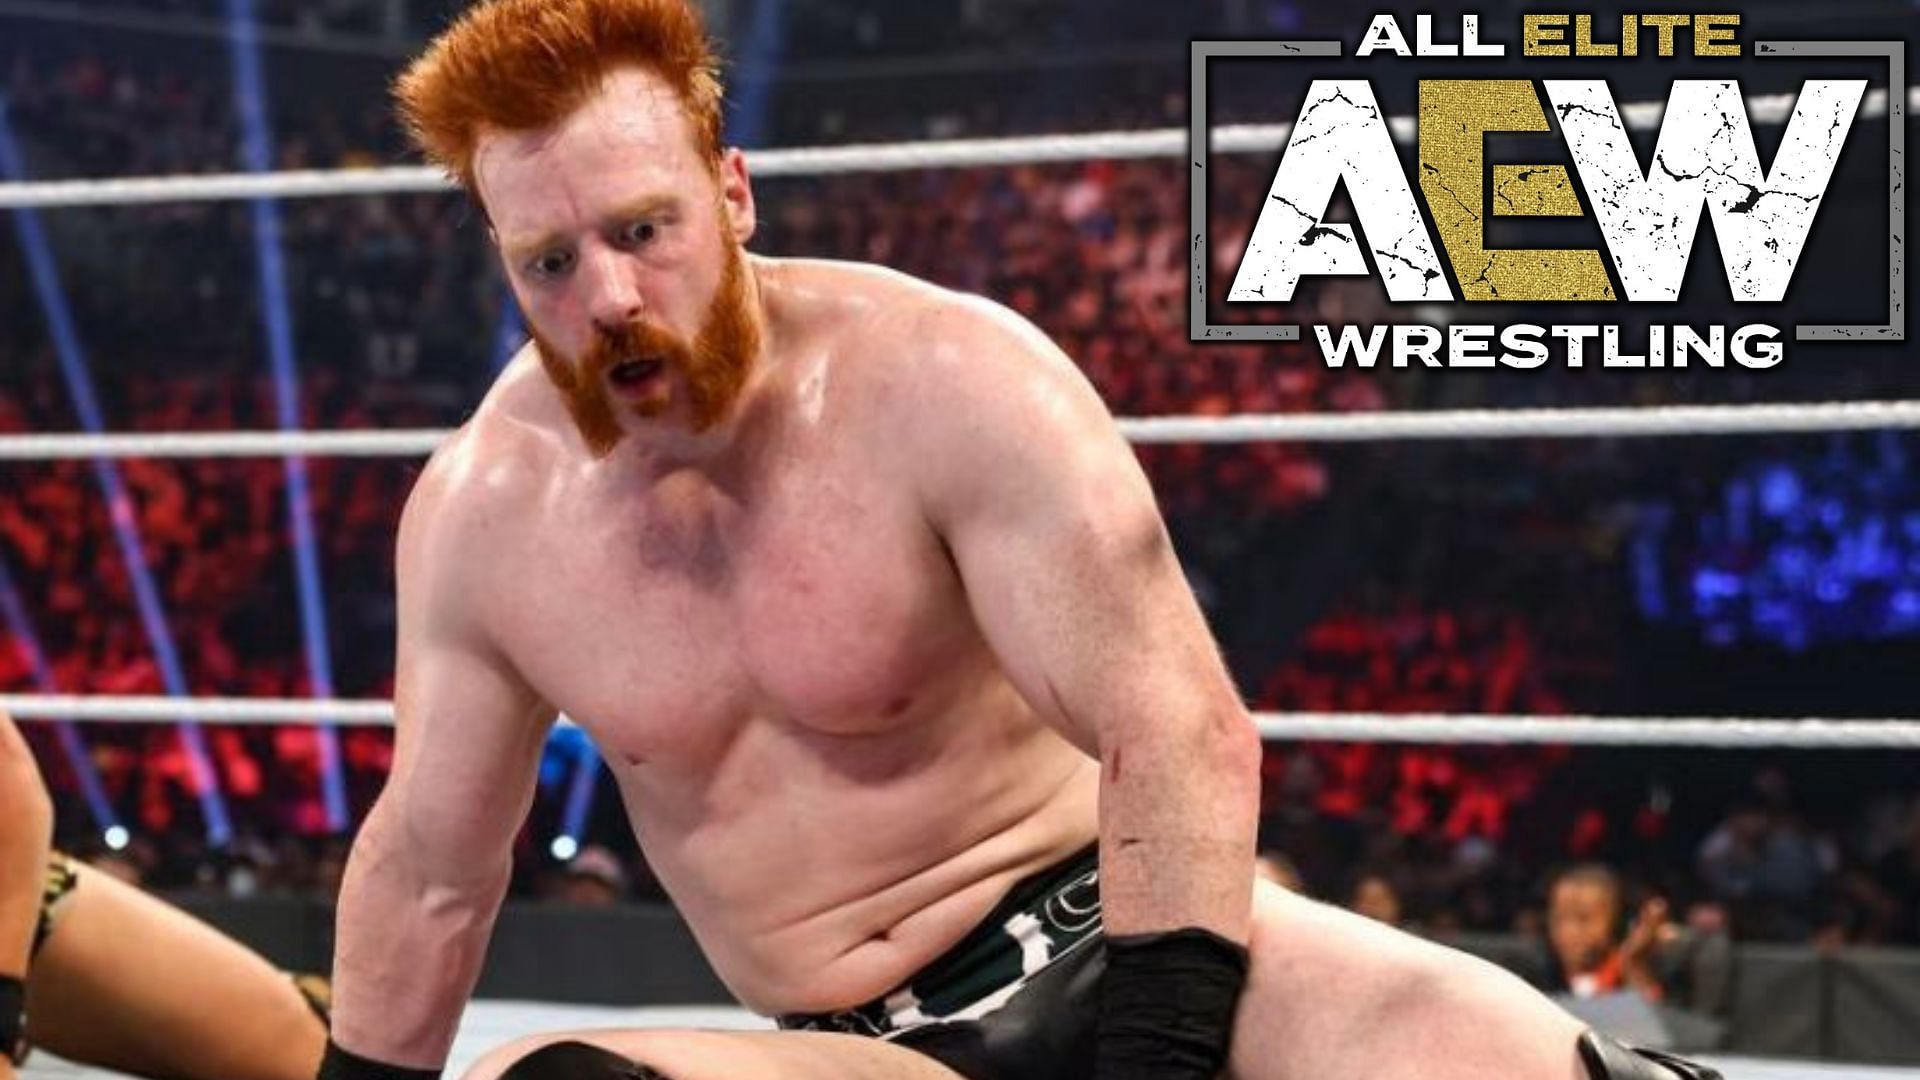 Sheamus and this former WWE Superstar had a well-received run togehter.